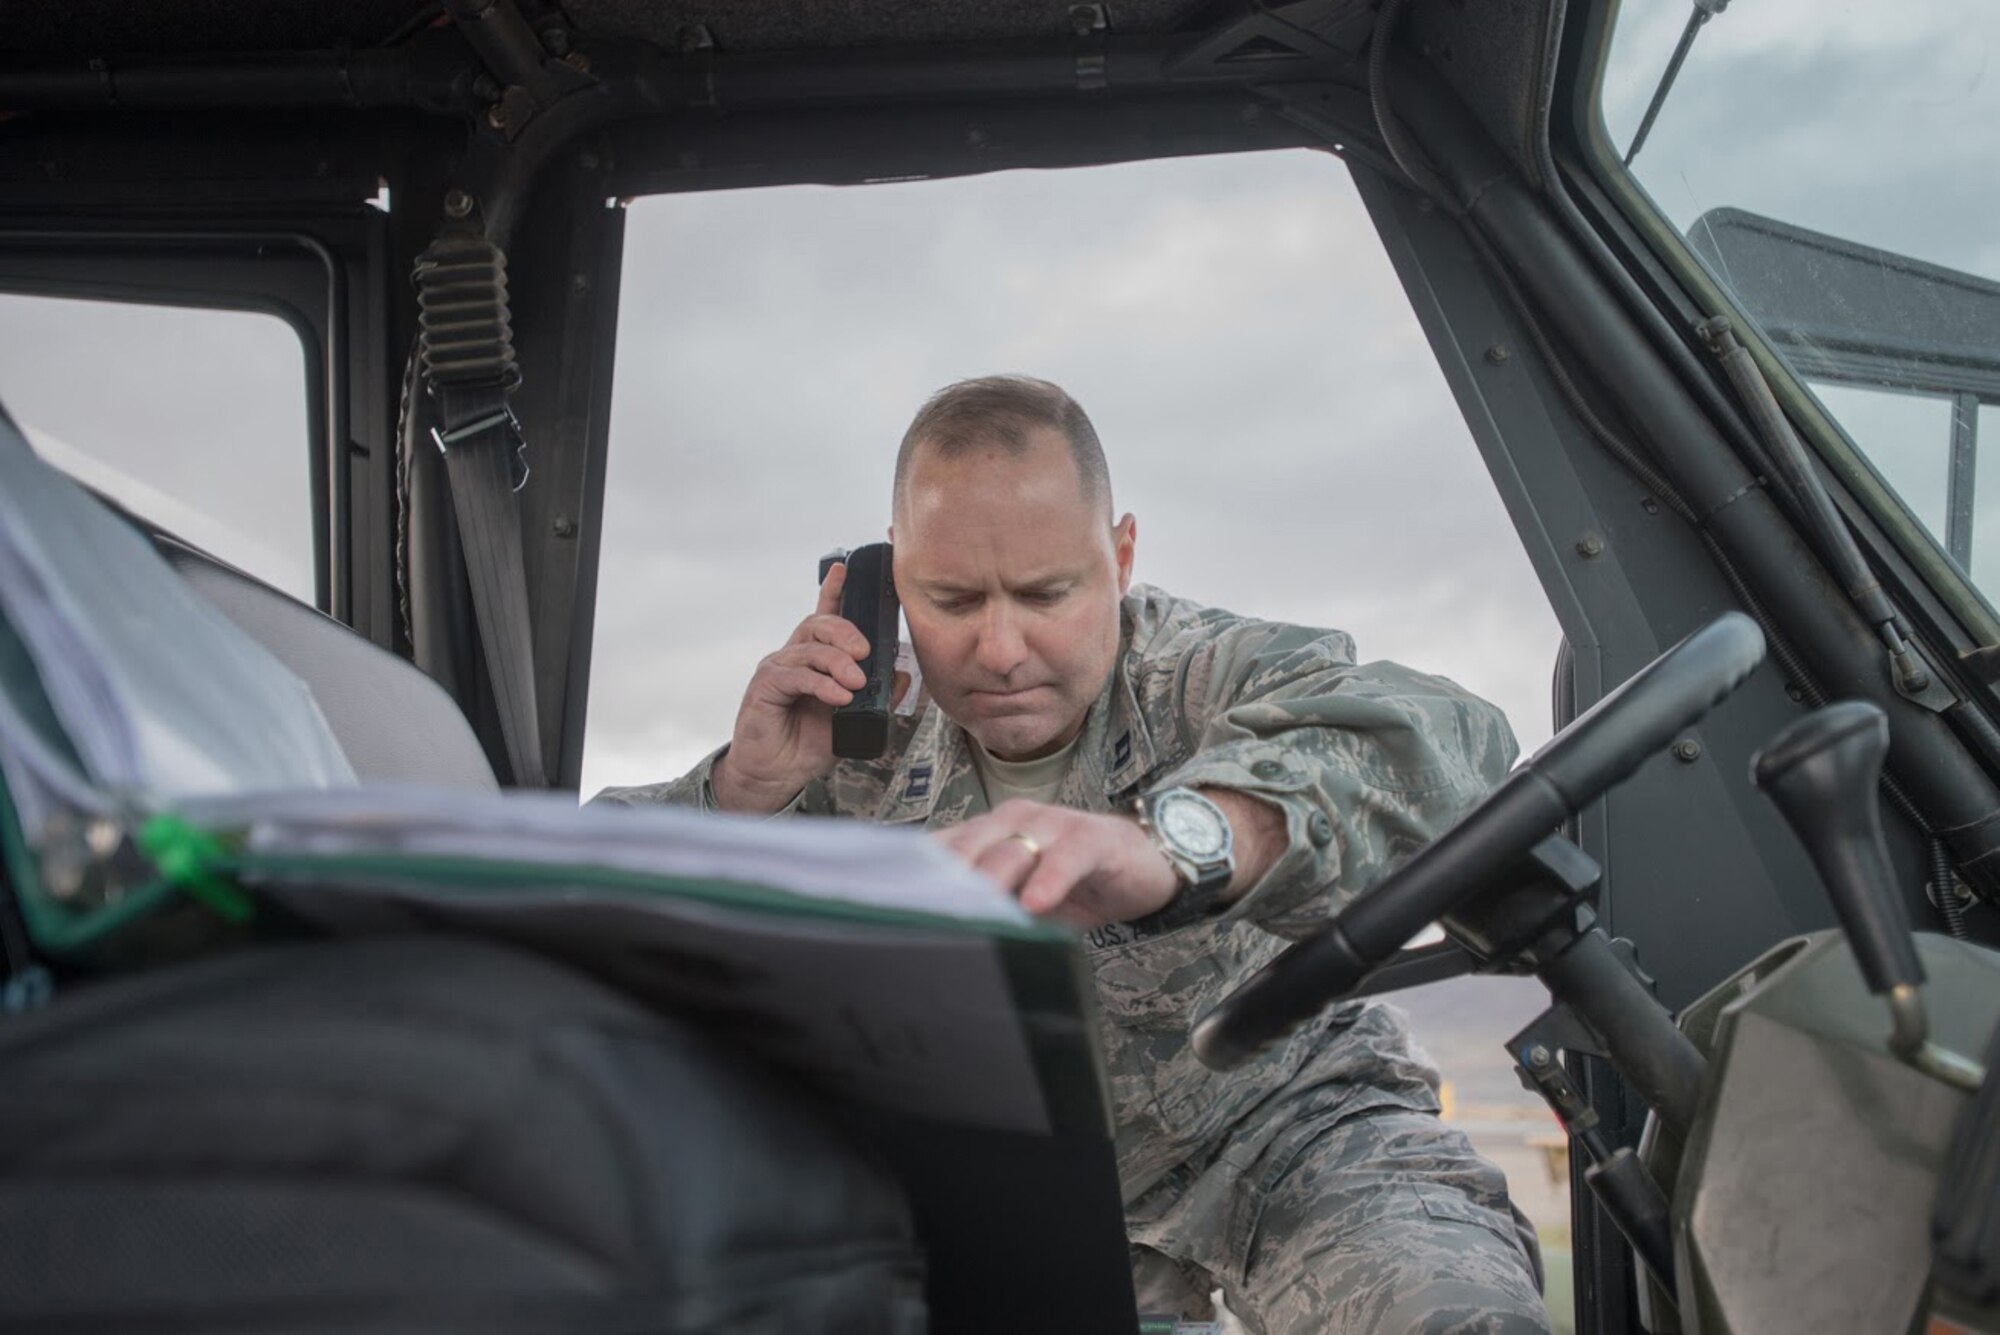 U.S. Air Force Capt. James Embry, air operations officer with the Kentucky Air National Guard’s 123rd Contingency Response Group, communicates joint mission-essential tasks to higher headquarters at Amedee Army Airfield, Calif., on March 6, 2016. The 123rd CRG is working in conjunction with the U.S. Army’s 688th Rapid Port Opening Element and a team from the Defense Logistics Agency to operate Joint Task Force-Port Opening Sangala during a week-long exercise called Operation Lumberjack. The objective of the JTF-PO is to establish an aerial port of debarkation, provide initial distribution capability and set up warehousing for distribution beyond a forward node. (Kentucky Air National Guard photo by Master Sgt. Phil Speck)